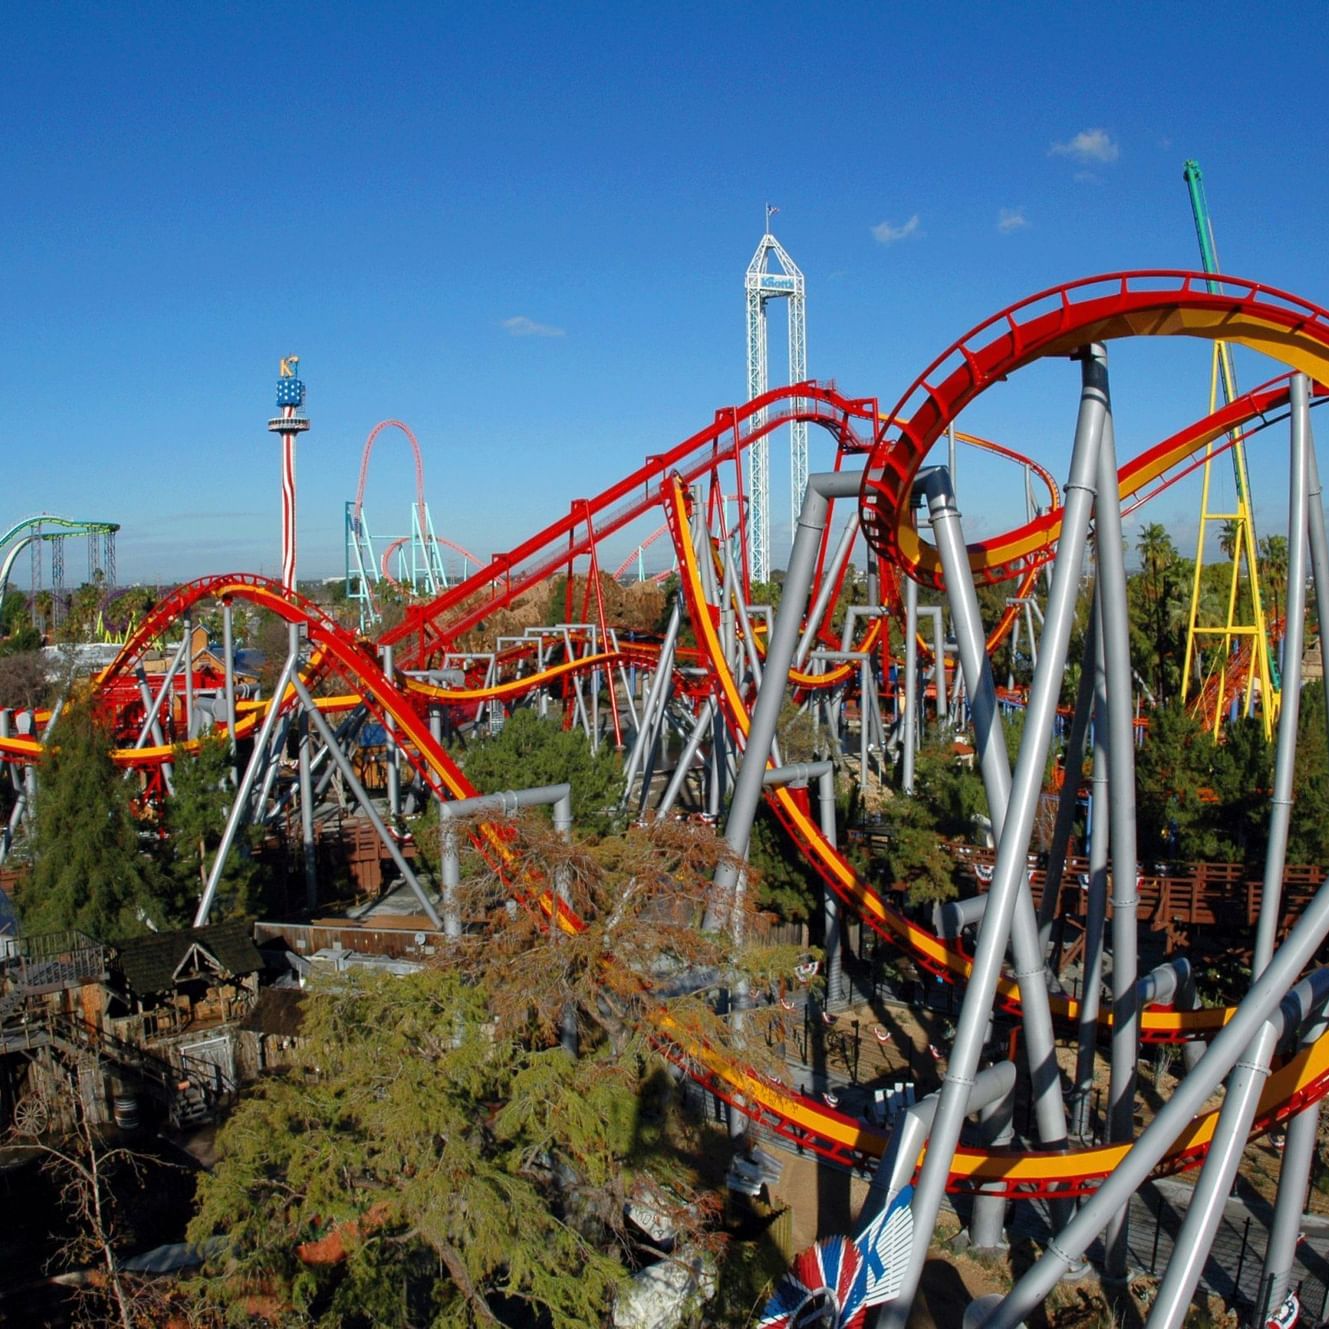 Exterior view of the Rollercoaster at Orange County